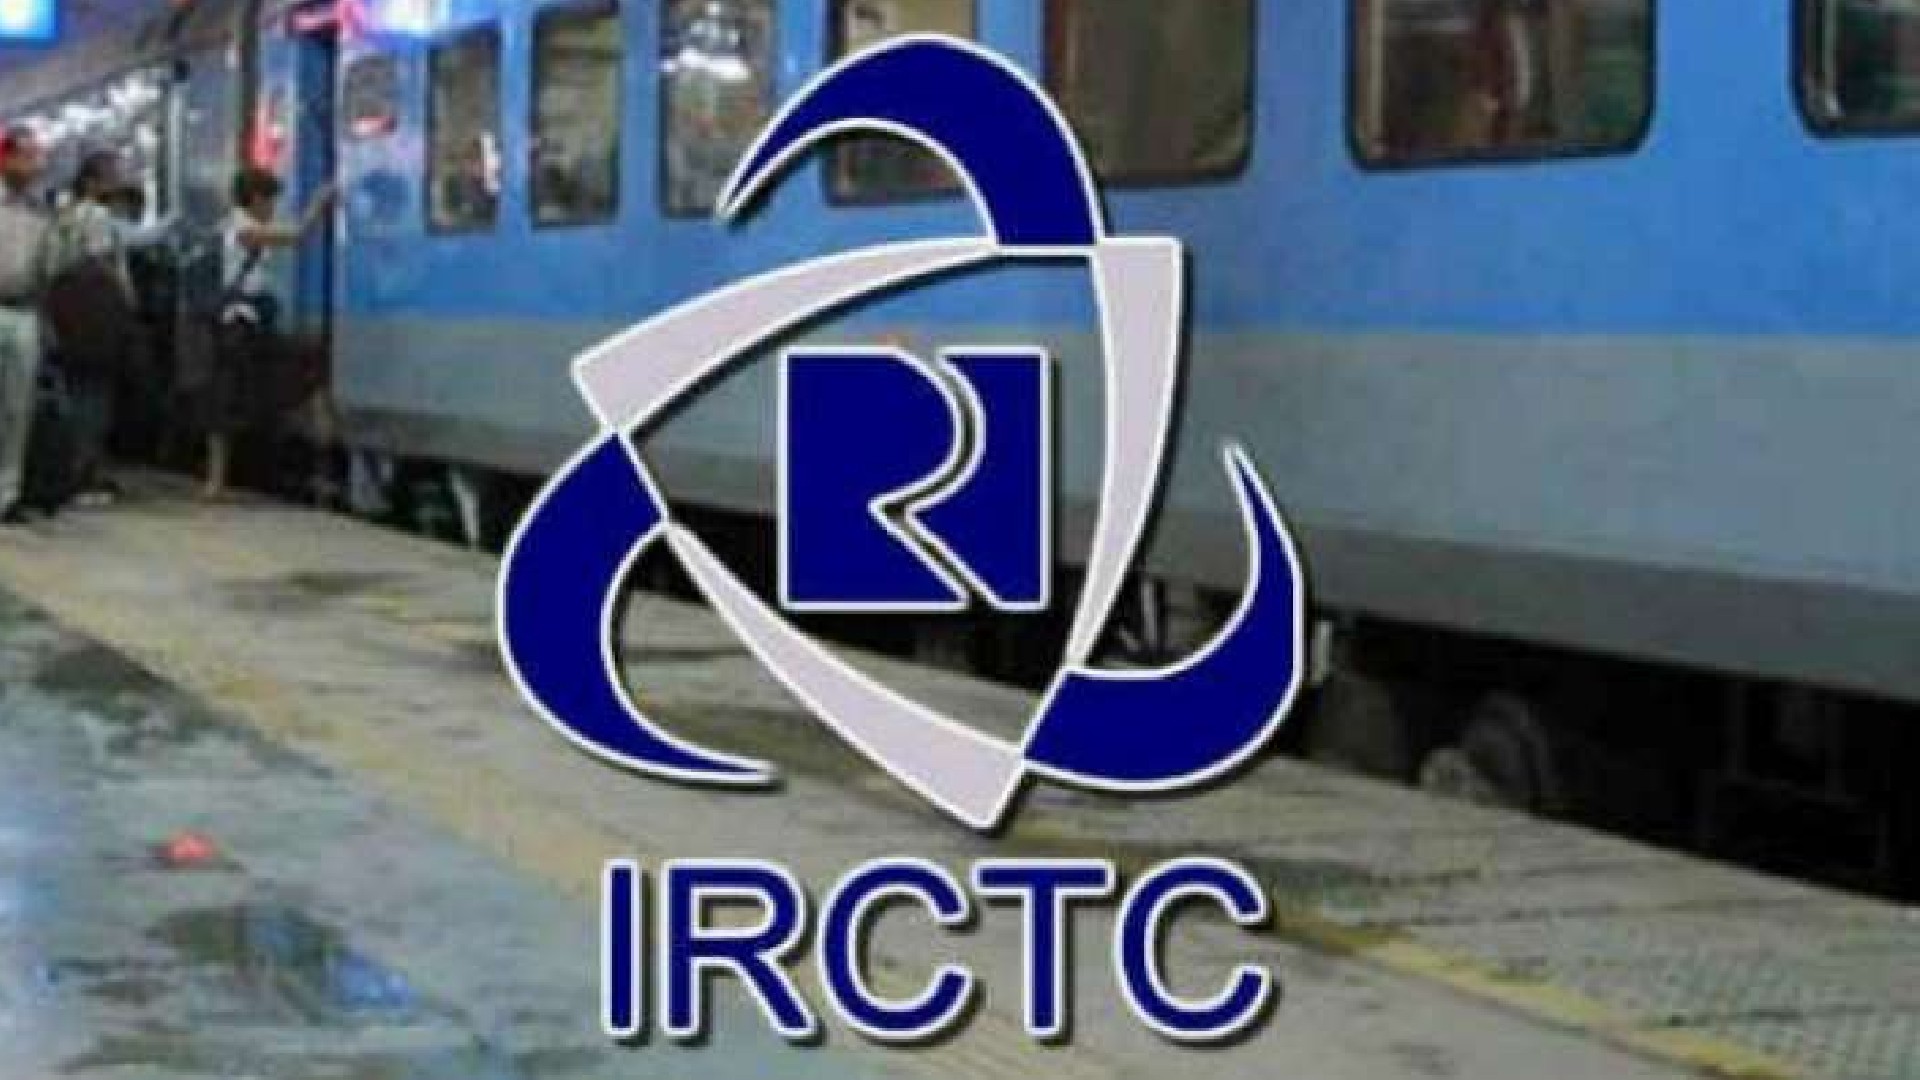 Why Doesn’t IRCTC Allow Passengers To Choose Their Seats?